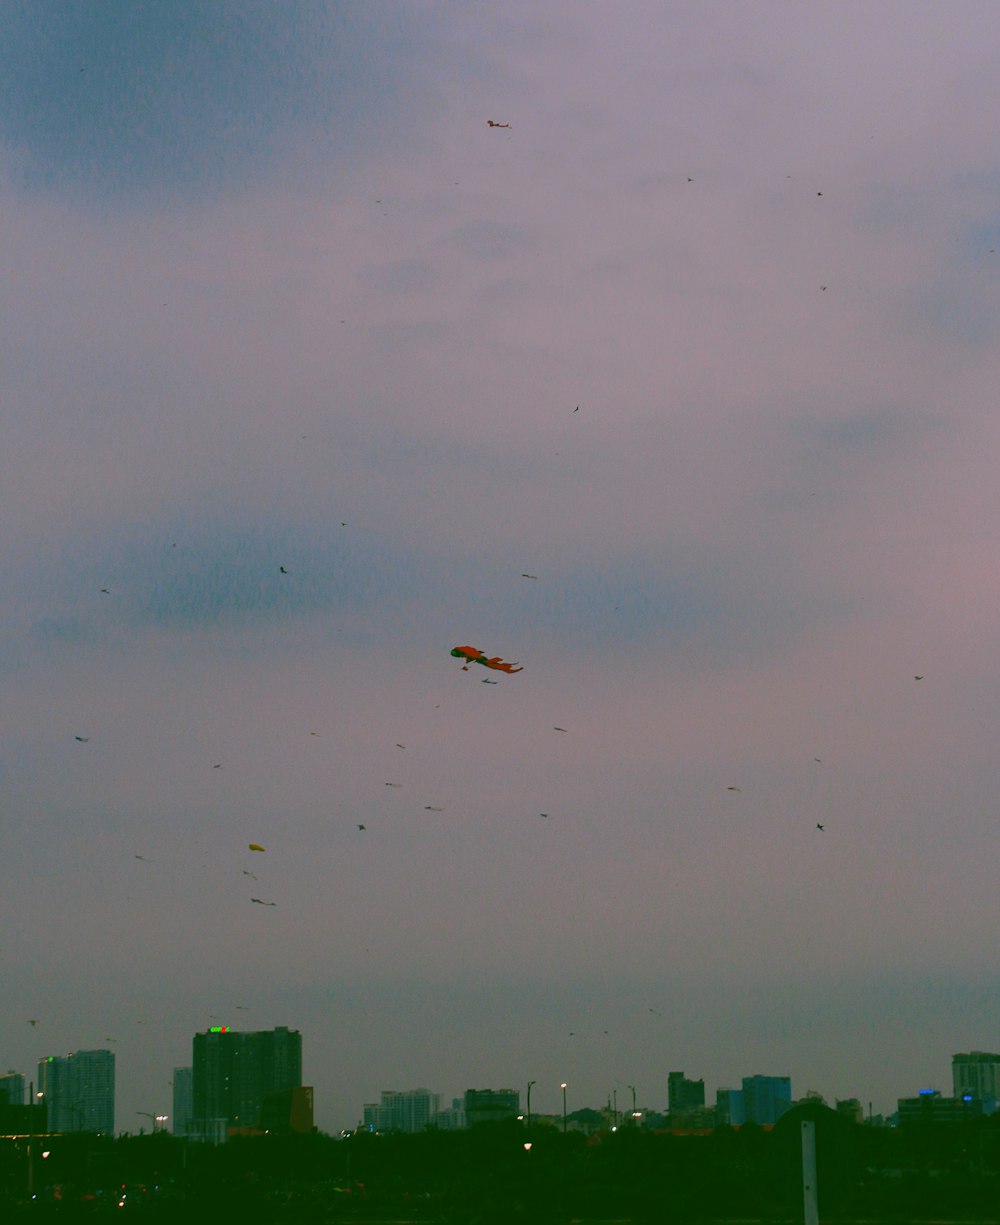 a group of kites flying in the sky over a city